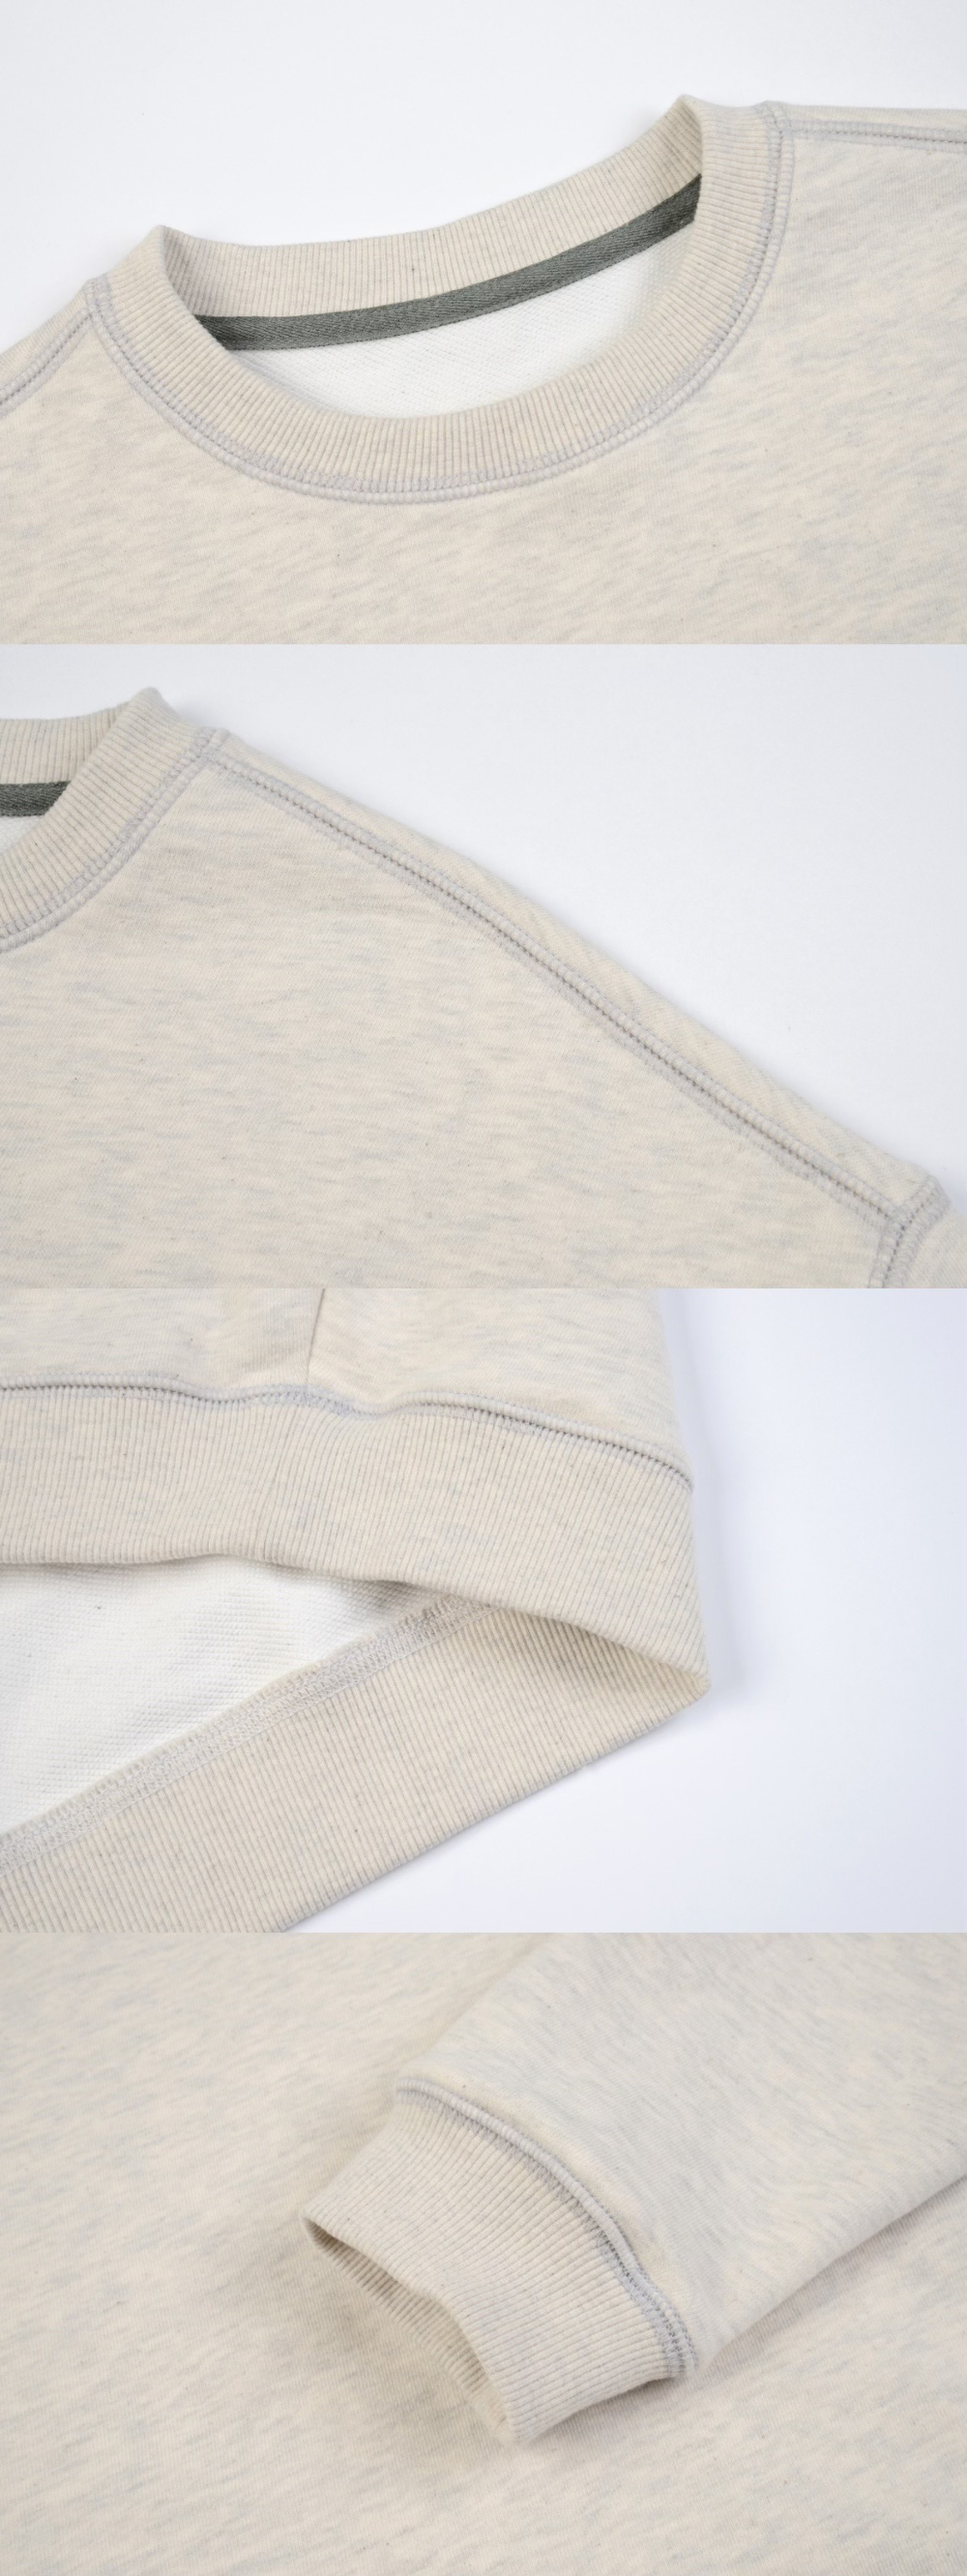 long sleeved tee detail image-S1L80